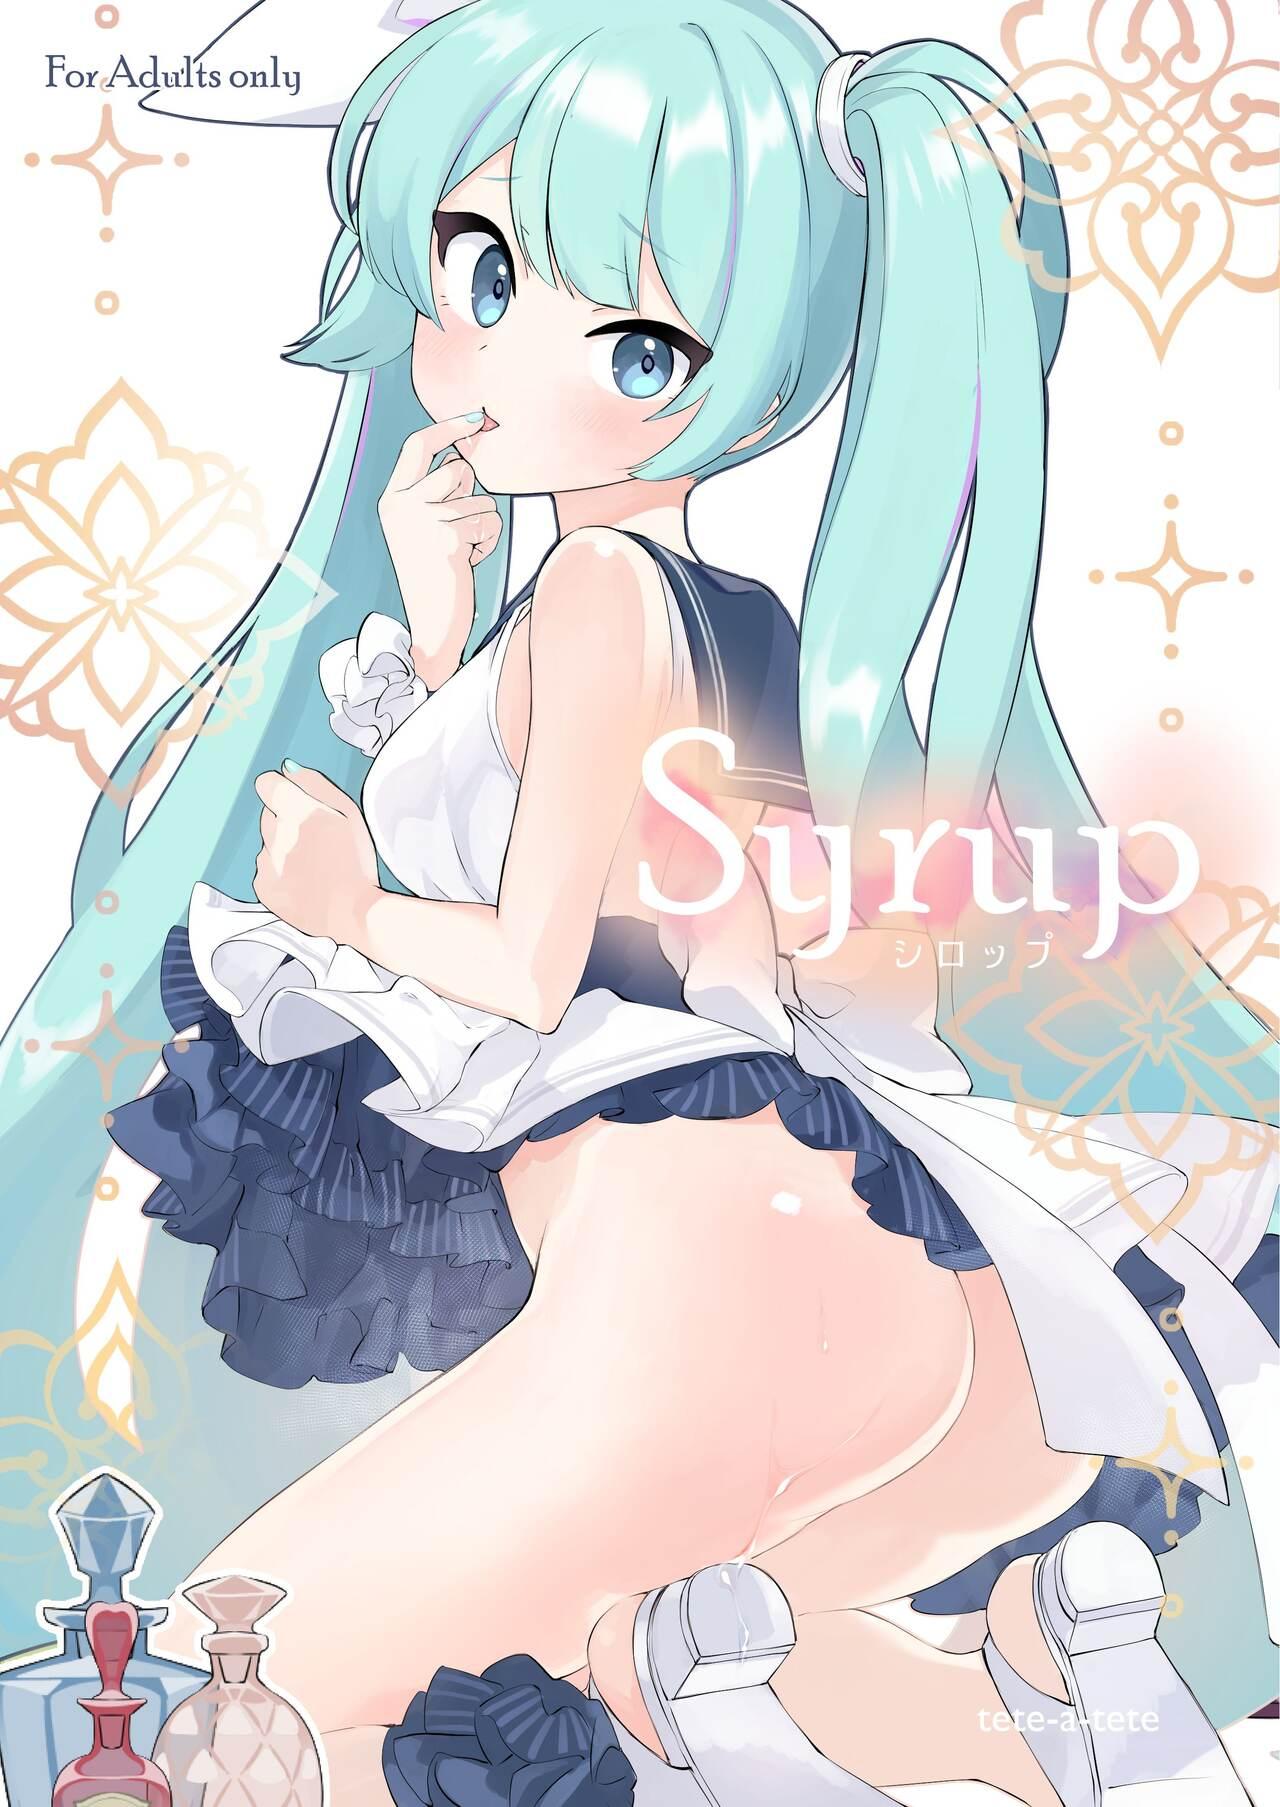 Syrup 0